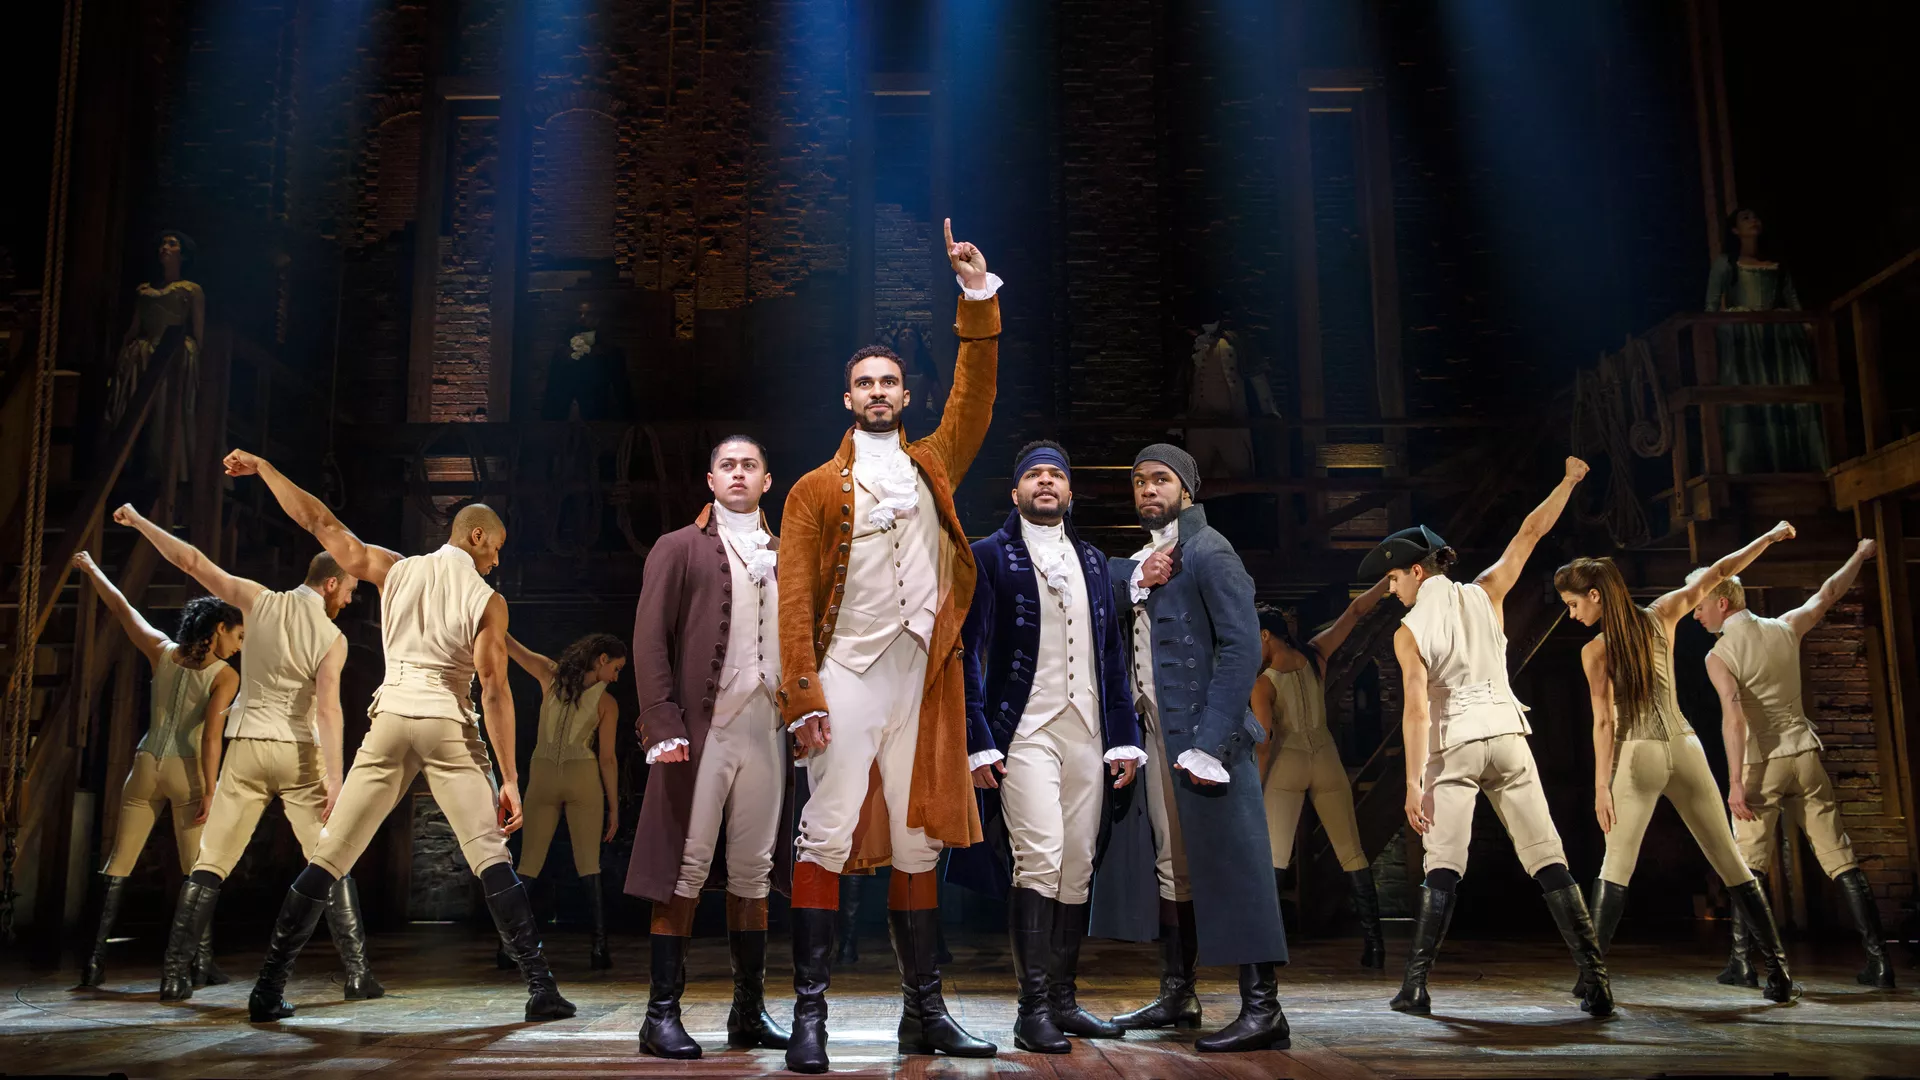 Performers in "Hamilton" on stage